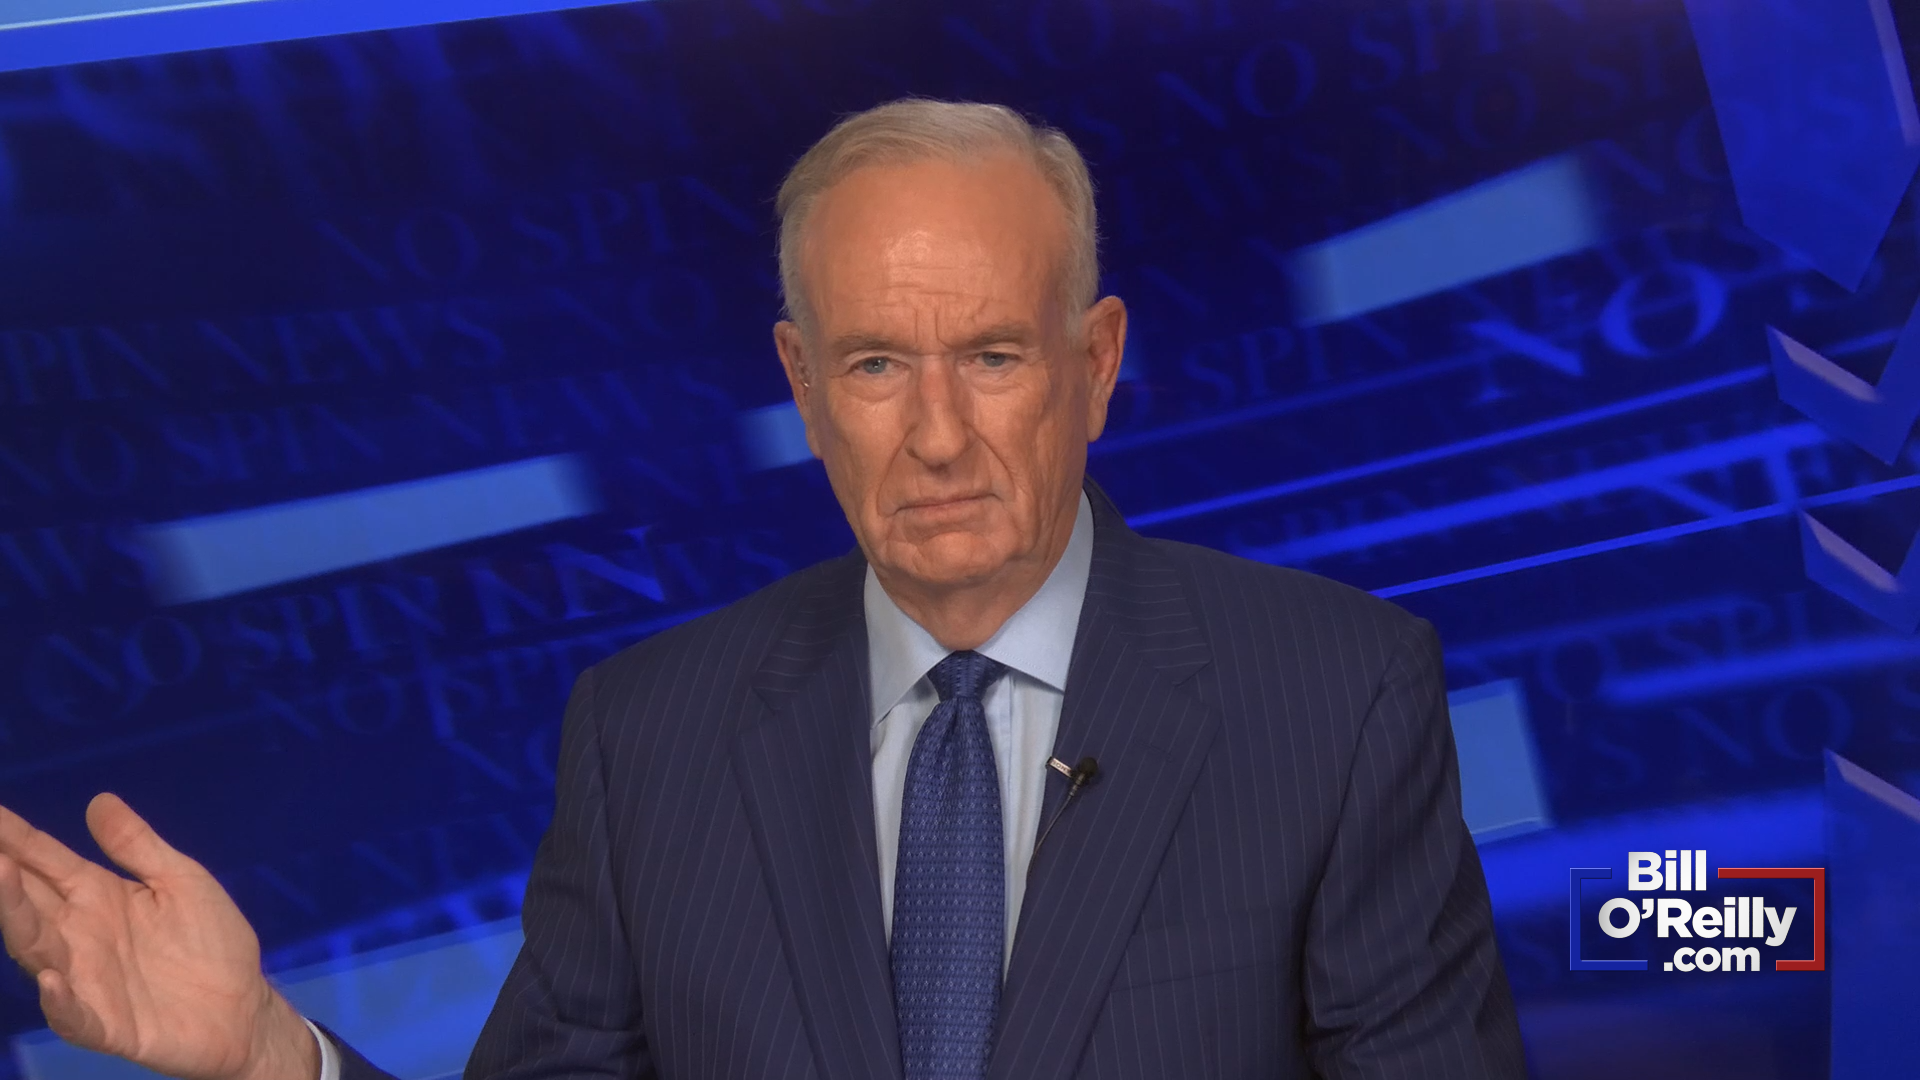 O'Reilly: 'This is Never Going to be Solved.'